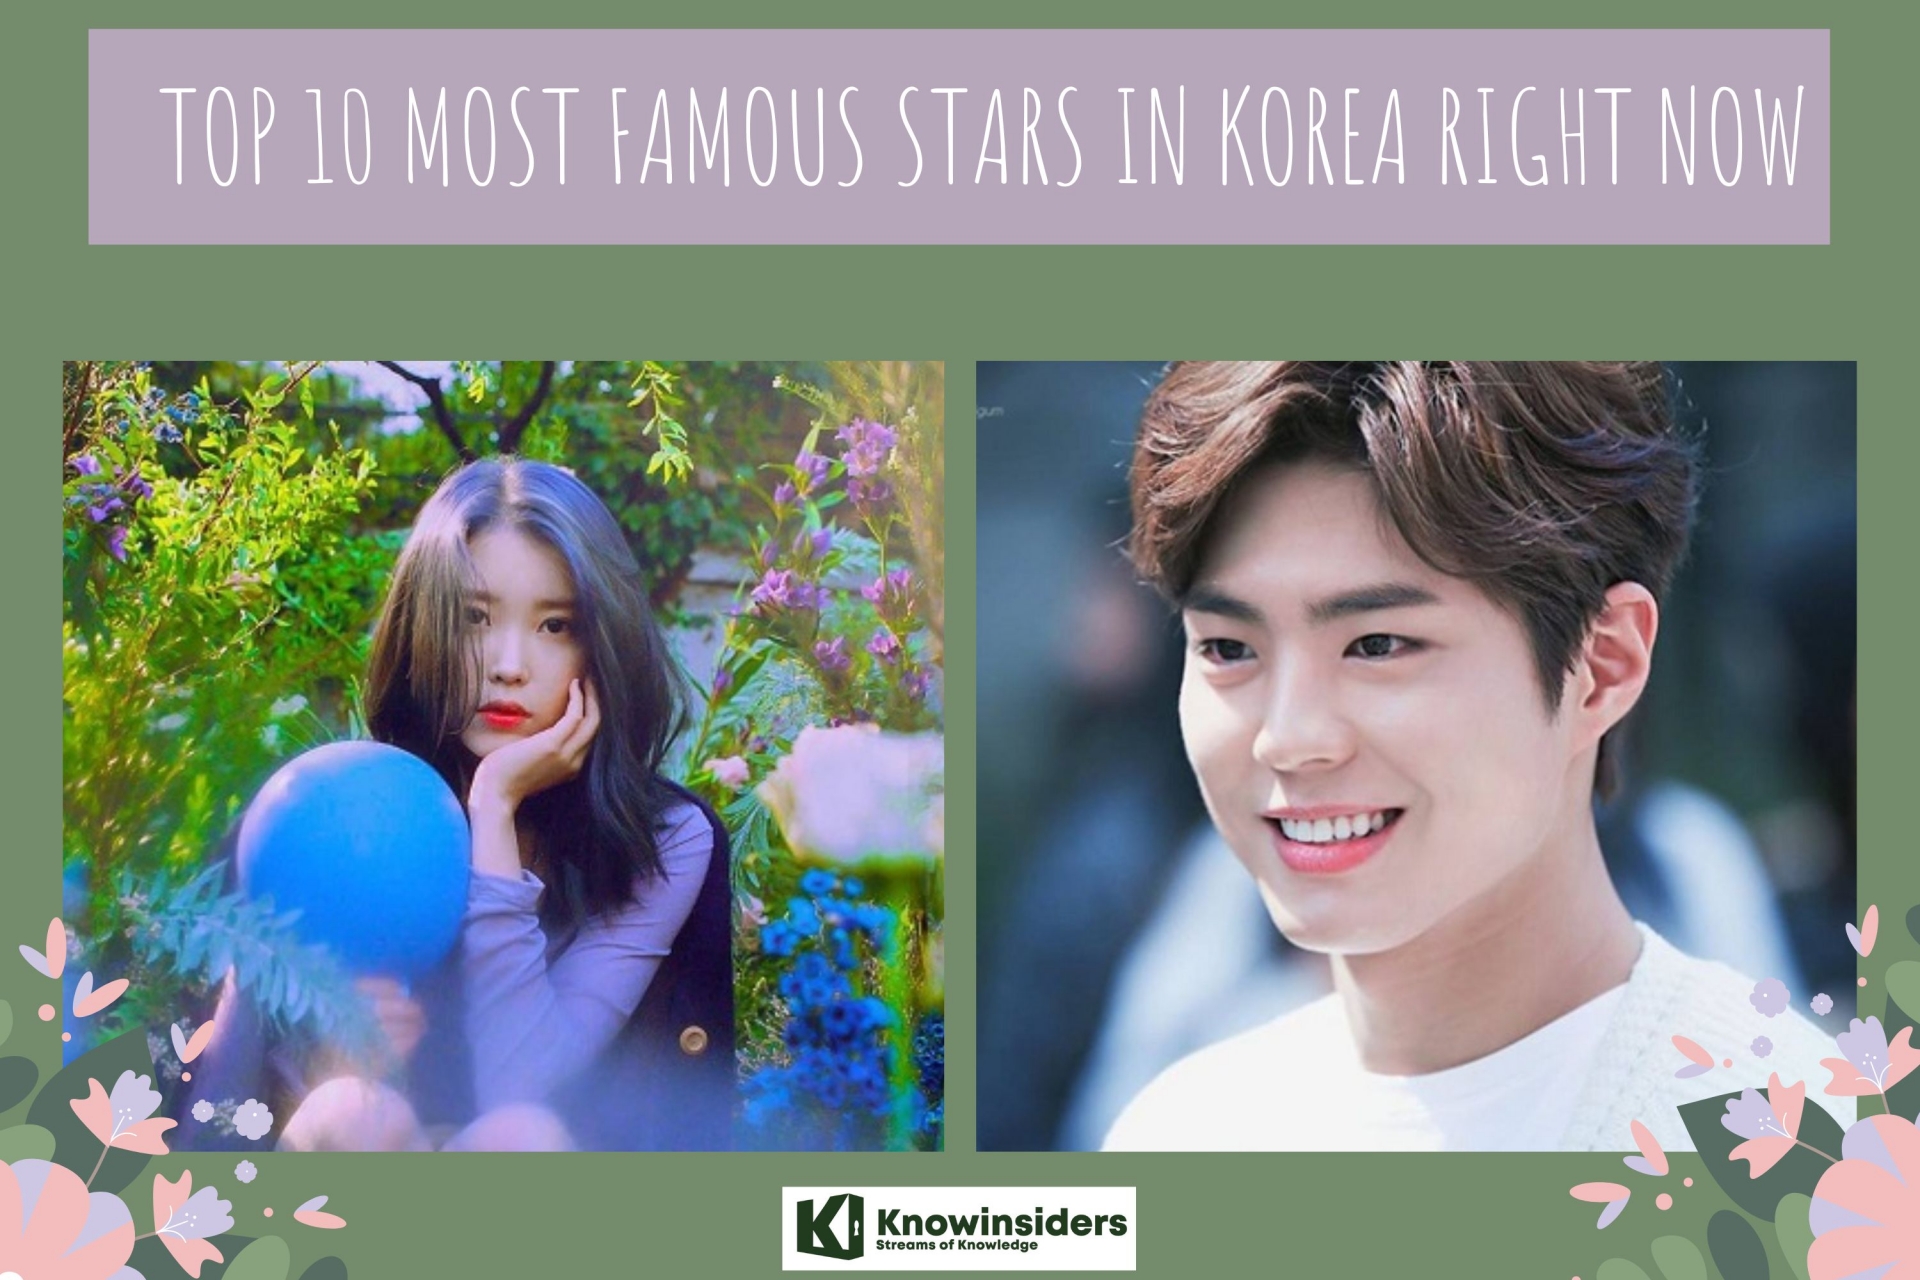 Top 10 Most Famous Stars in Korea Right Now